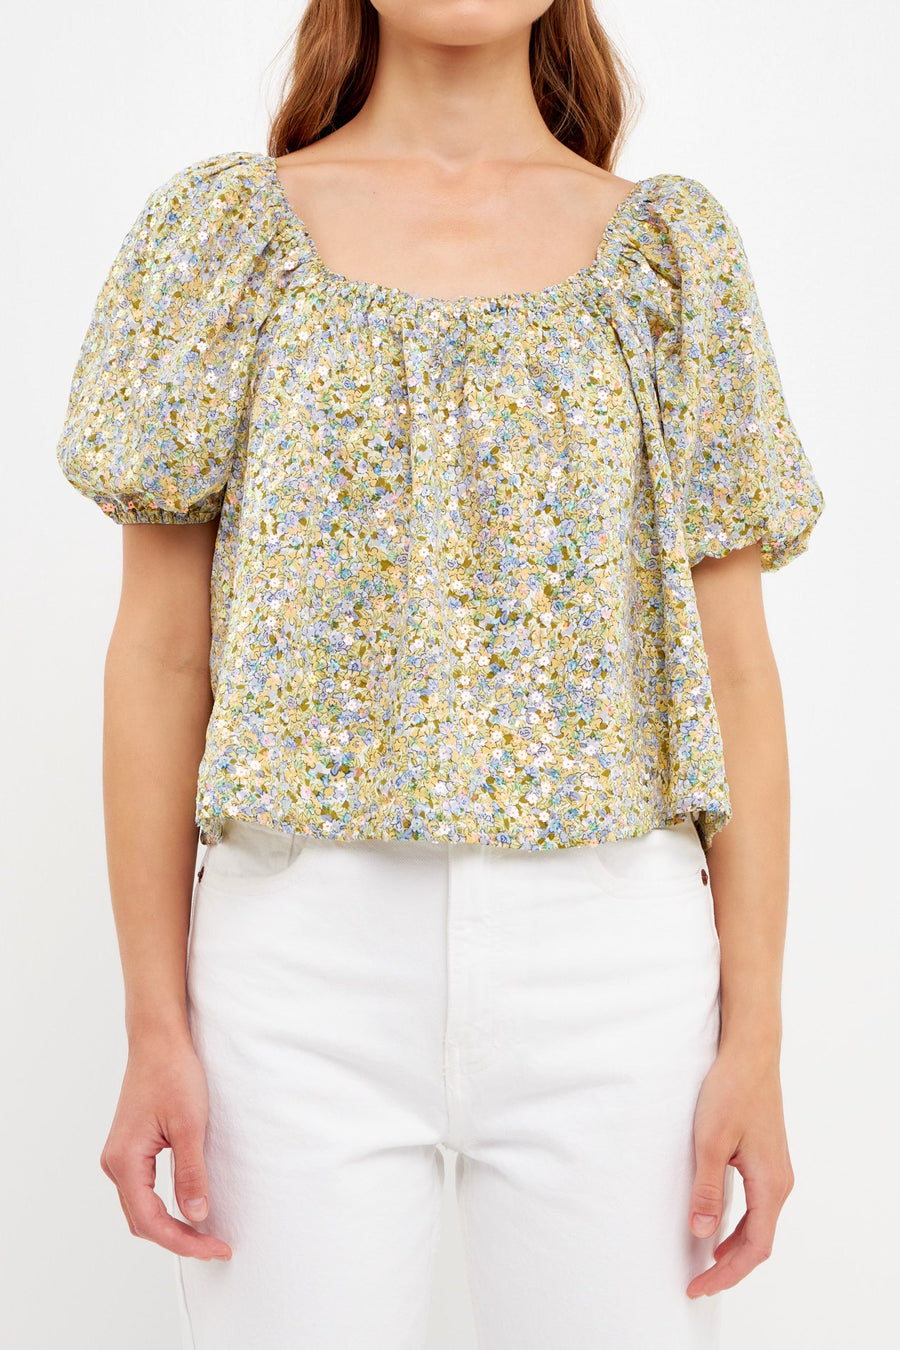 FREE THE ROSES-Floral Print with Sequins Top-TOPS available at Objectrare